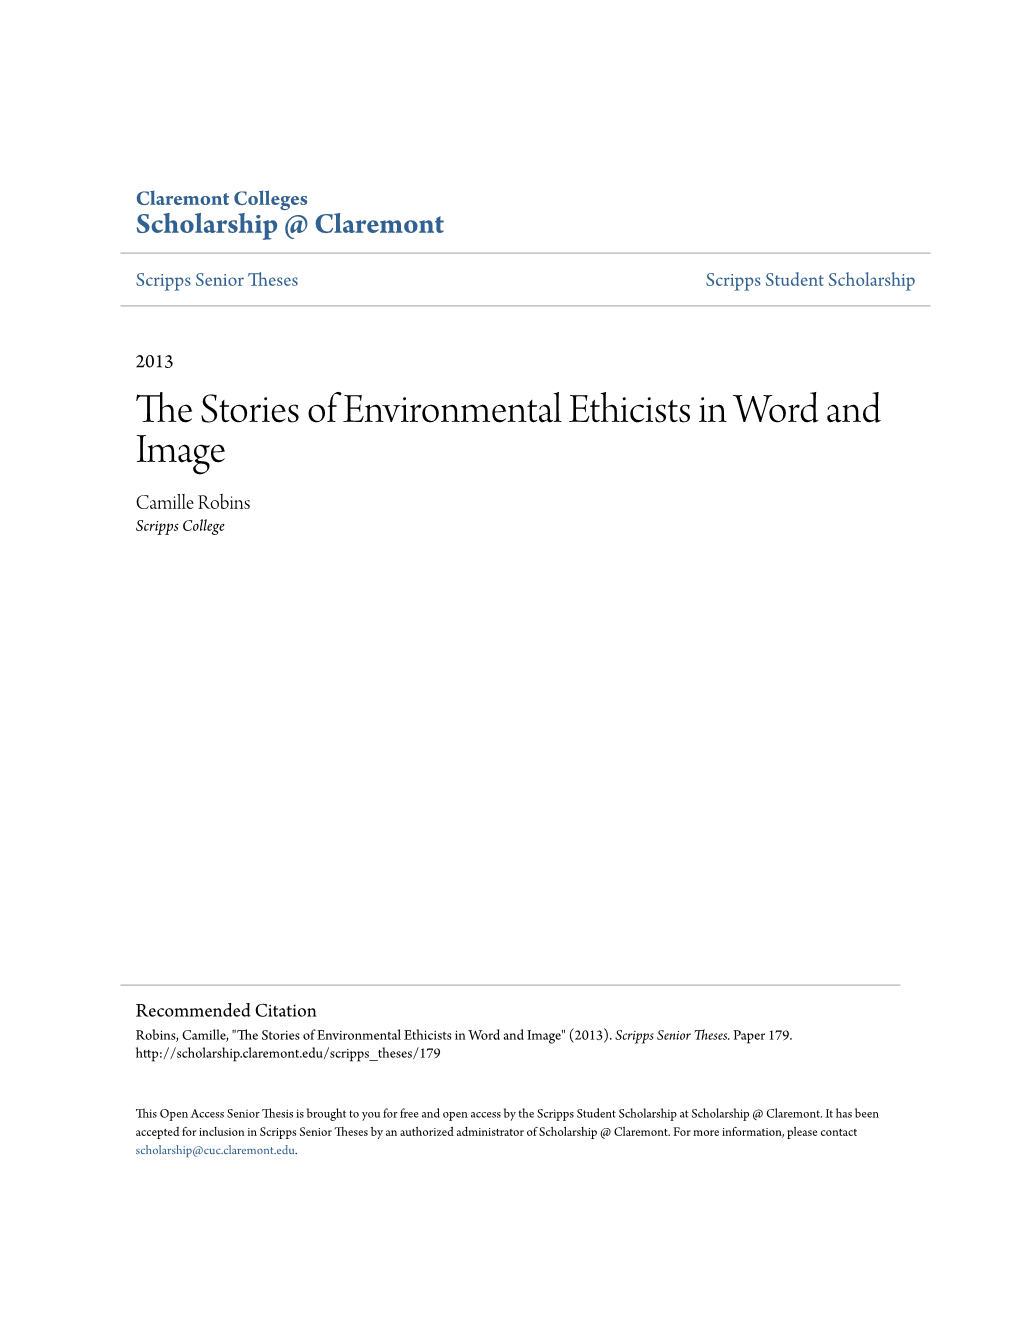 The Stories of Environmental Ethicists in Word and Image